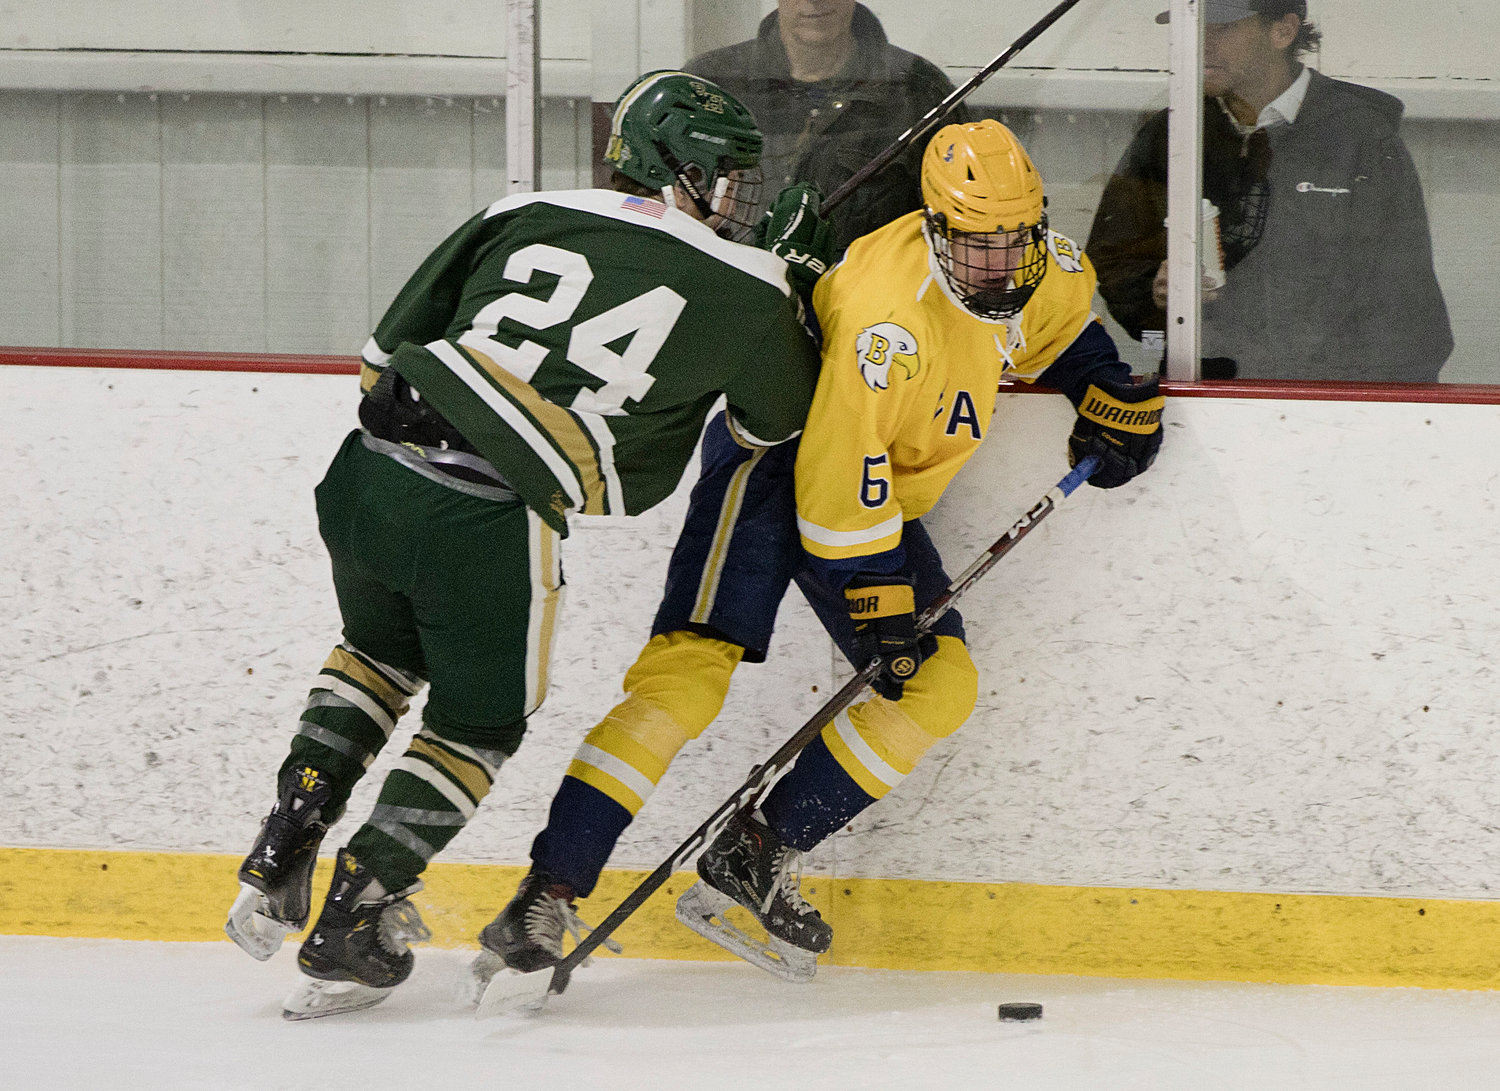 Barrington's Adam Gorman is checked into the boards by a Hendricken opponent while retrieving a loose puck.